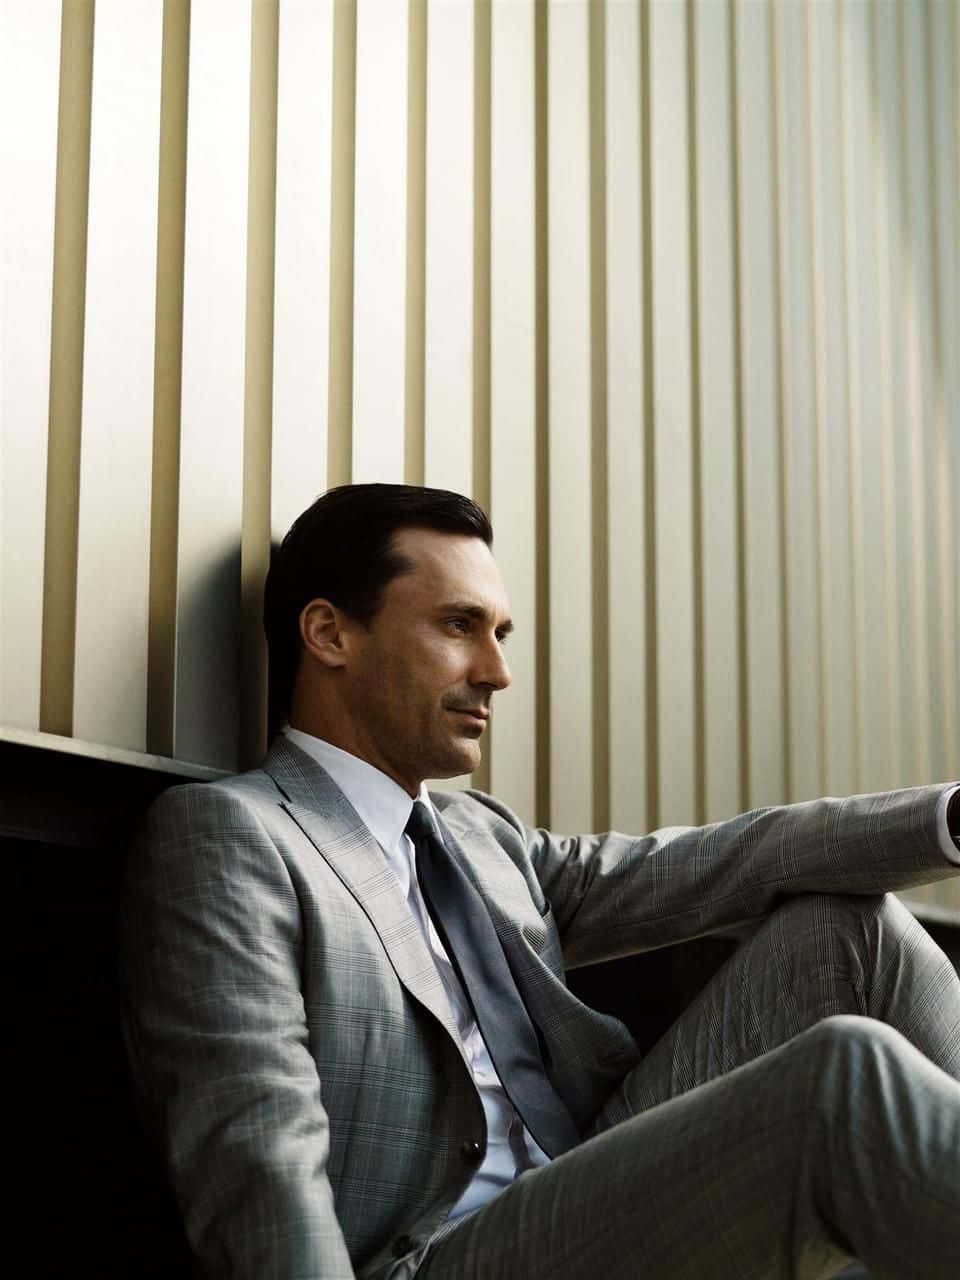 Actorjon Hamm Is Known For His Incredible Performances In Various Movies And Series. His Charismatic Presence On Screen Has Captivated Audiences Around The World. With His Handsome Looks And Undeniable Talent, Jon Hamm Is A Beloved Figure In The Entertainment Industry. Fondo de pantalla